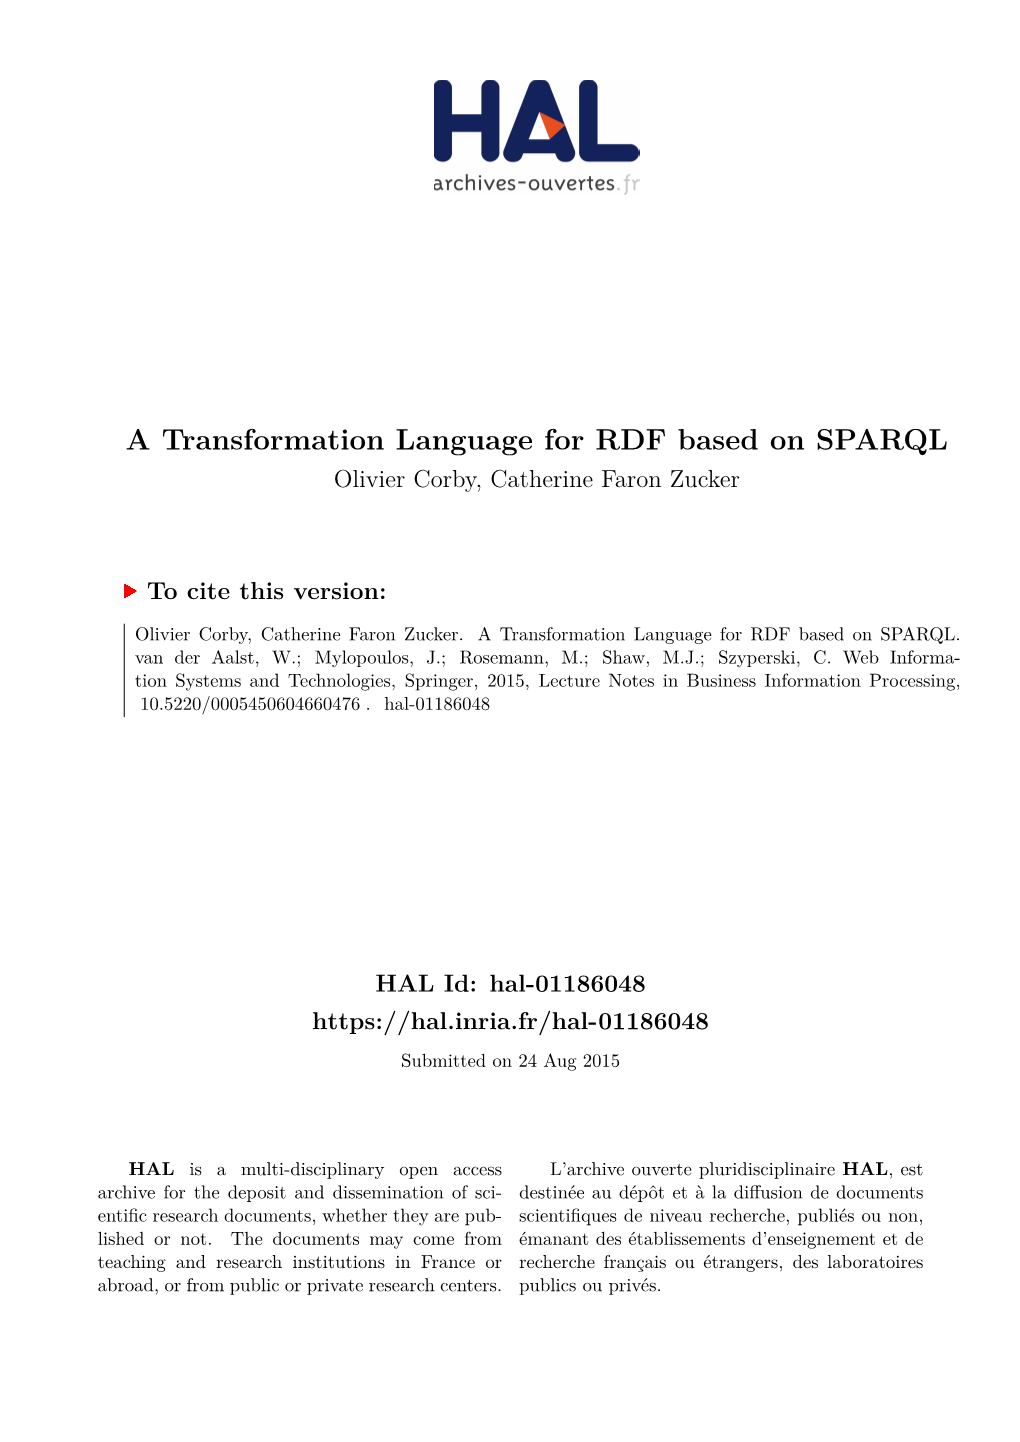 A Transformation Language for RDF Based on SPARQL Olivier Corby, Catherine Faron Zucker